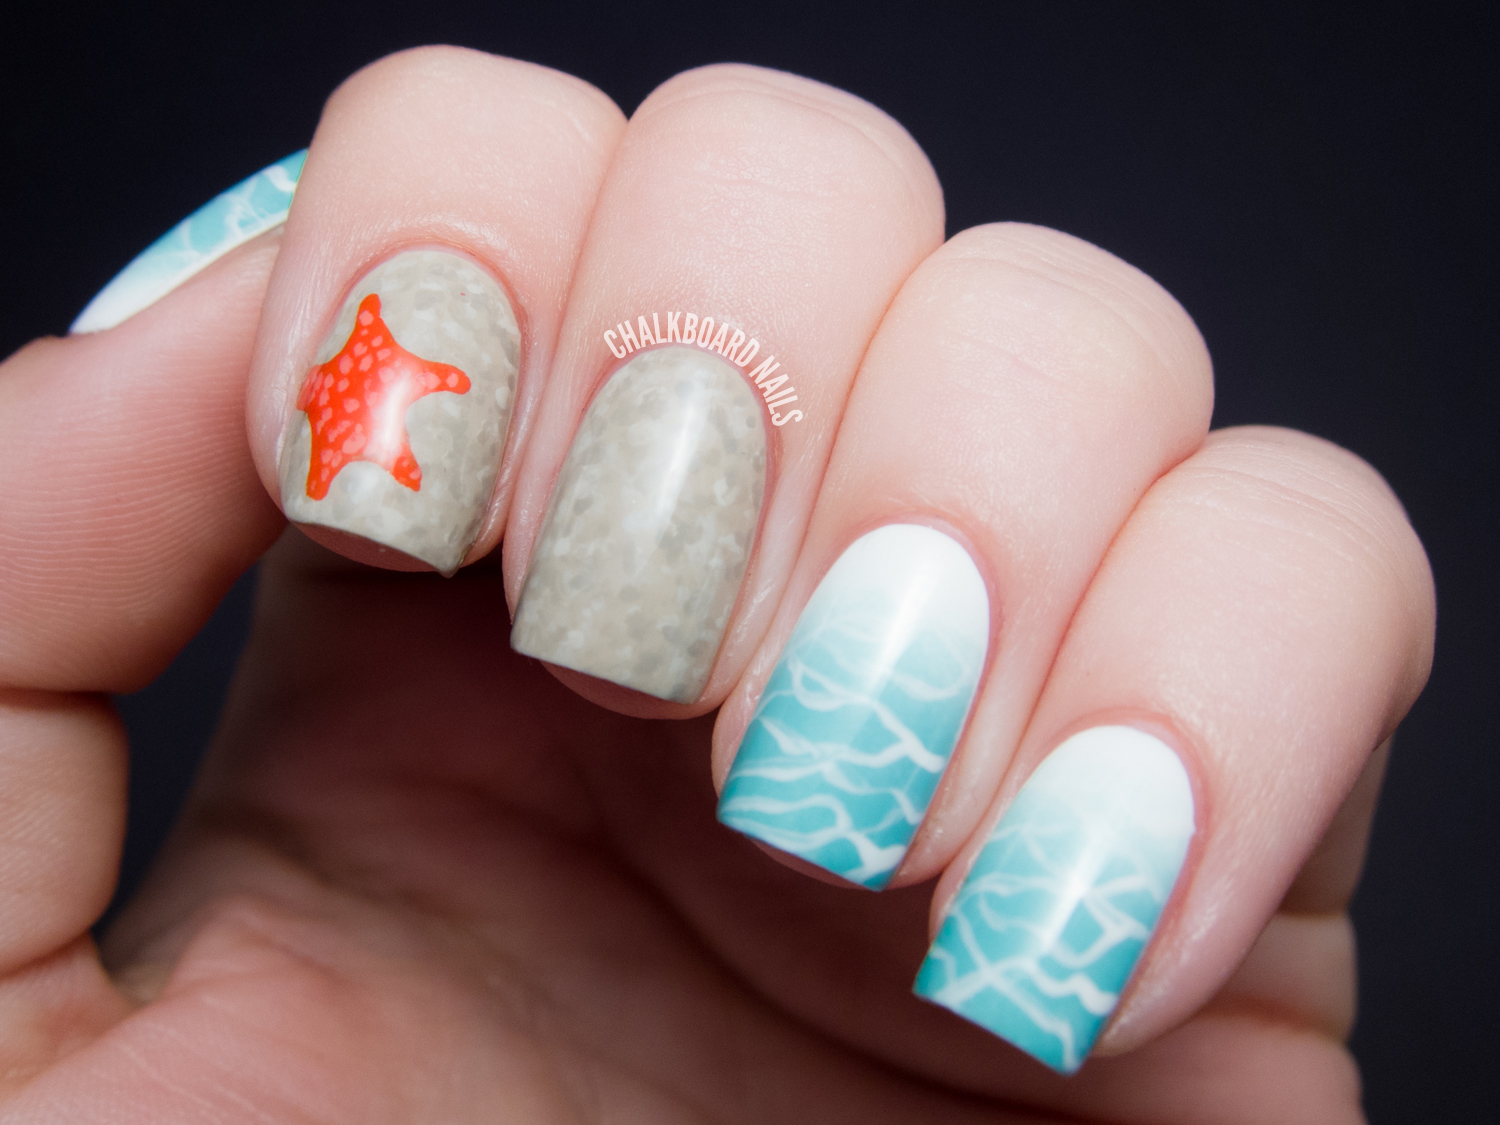 1. "Easy Summer Striped Nail Art Tutorial" - wide 6